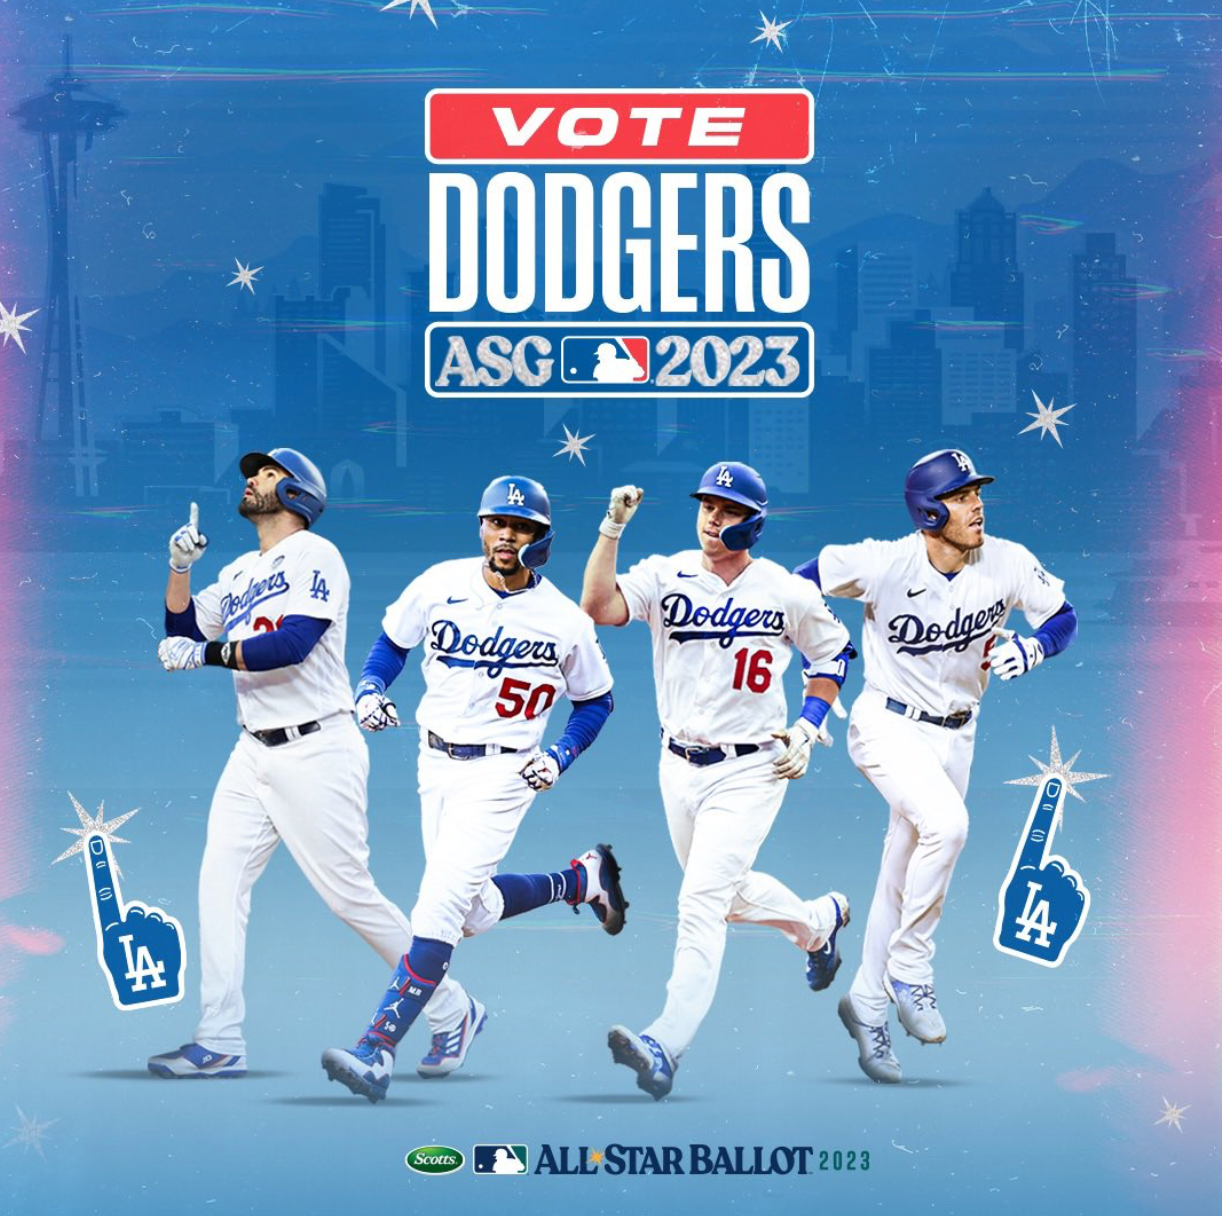 Phase 2 of All-Star voting underway for Smith, Freeman, Betts and Martinez, by Cary Osborne